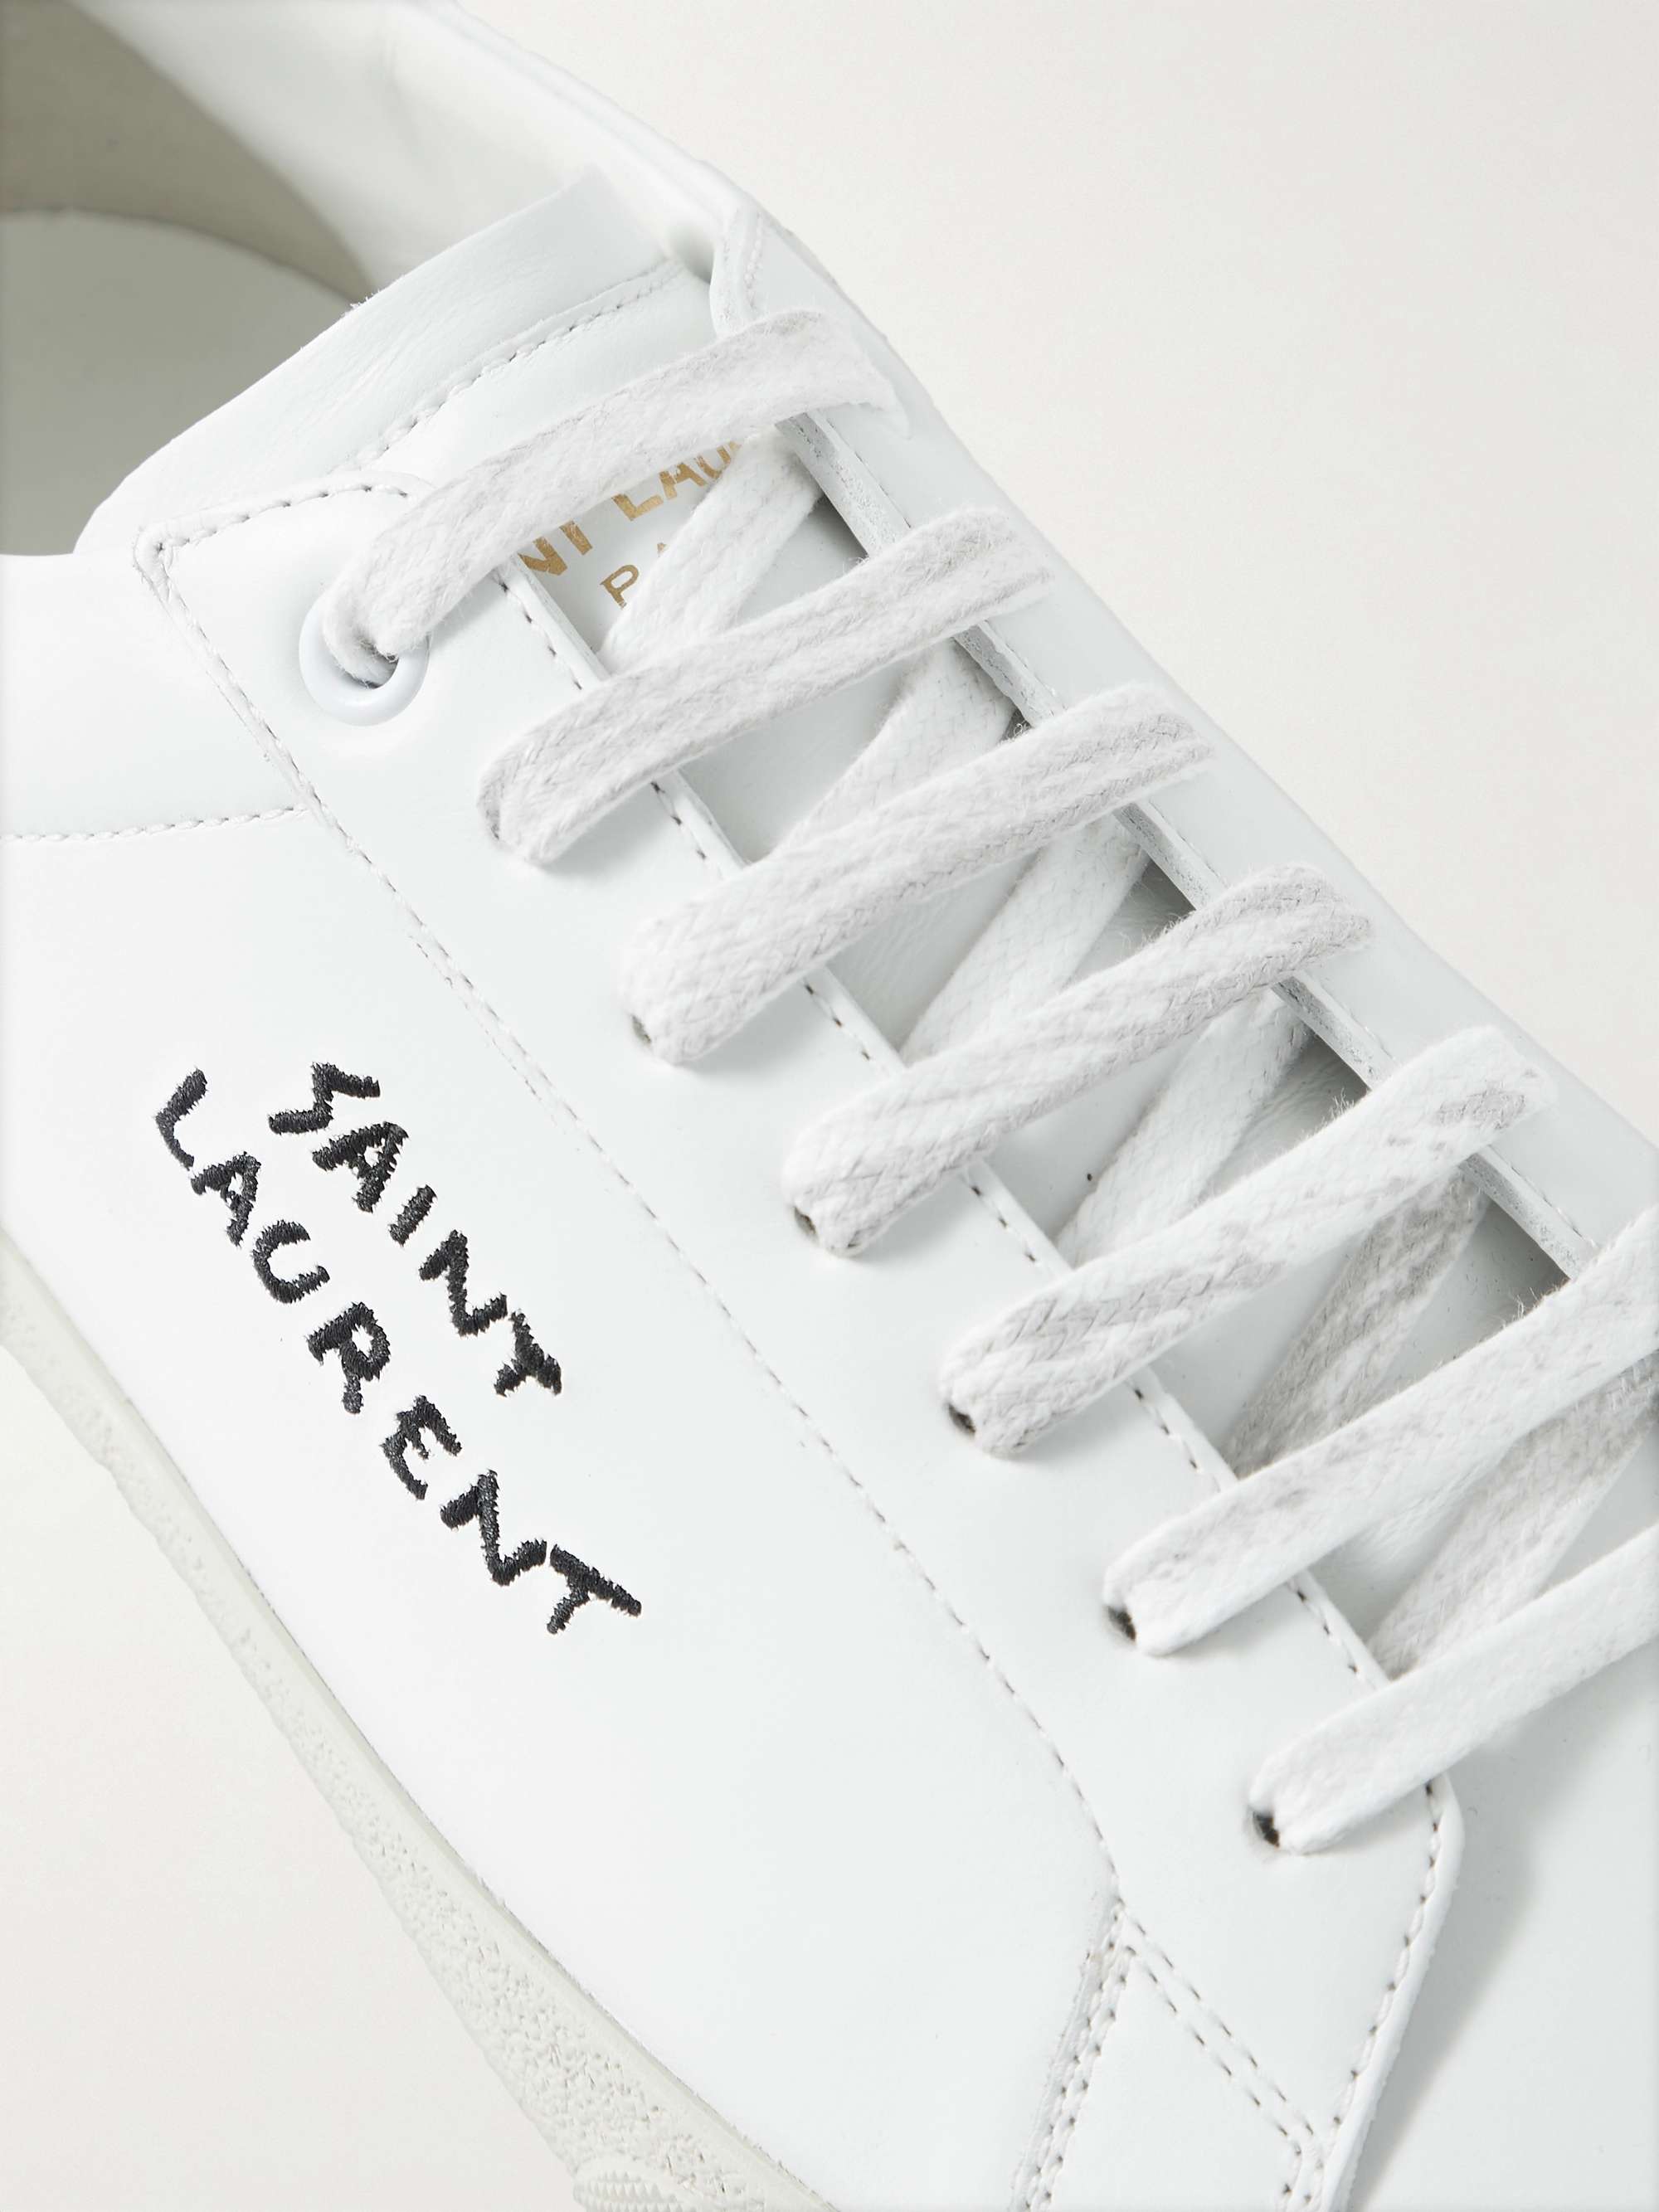 SAINT LAURENT SL/06 Court Classic Leather-Trimmed Logo-Embroidered Distressed Canvas Sneakers